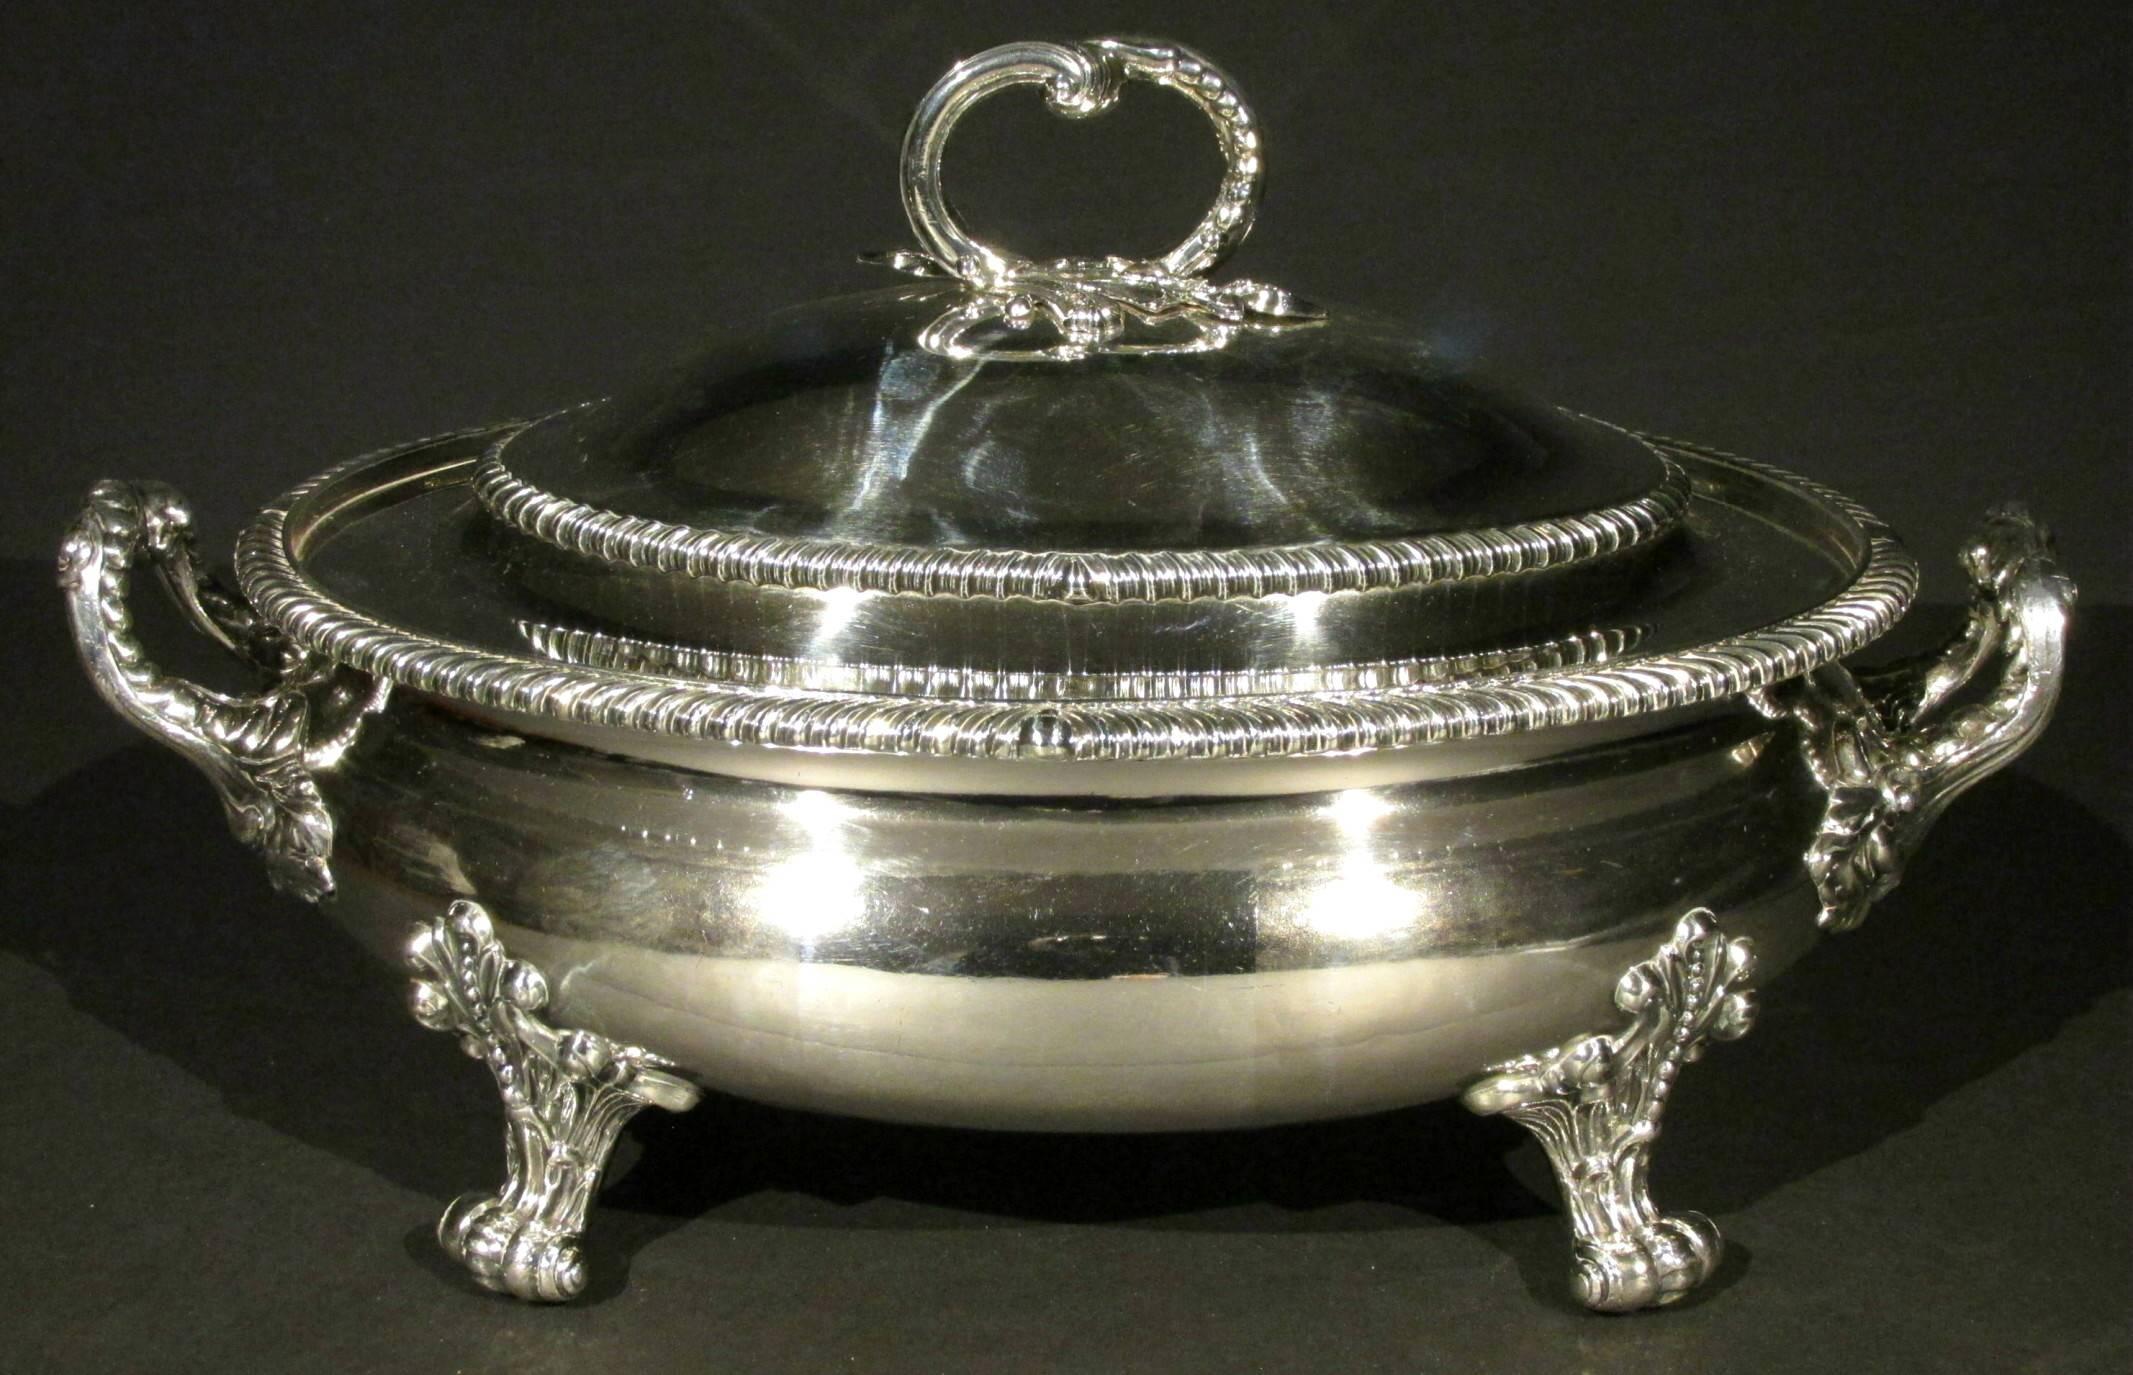 The oval bellied body rising to a gadroon decorated rim and applied foliate cast handles, one side bearing a large ‘let-in’ sterling silver lozenge engraved with a heraldic crest, coat-of-arms and motto 'UBI AMOR IBI FIDES' (Where there is Love